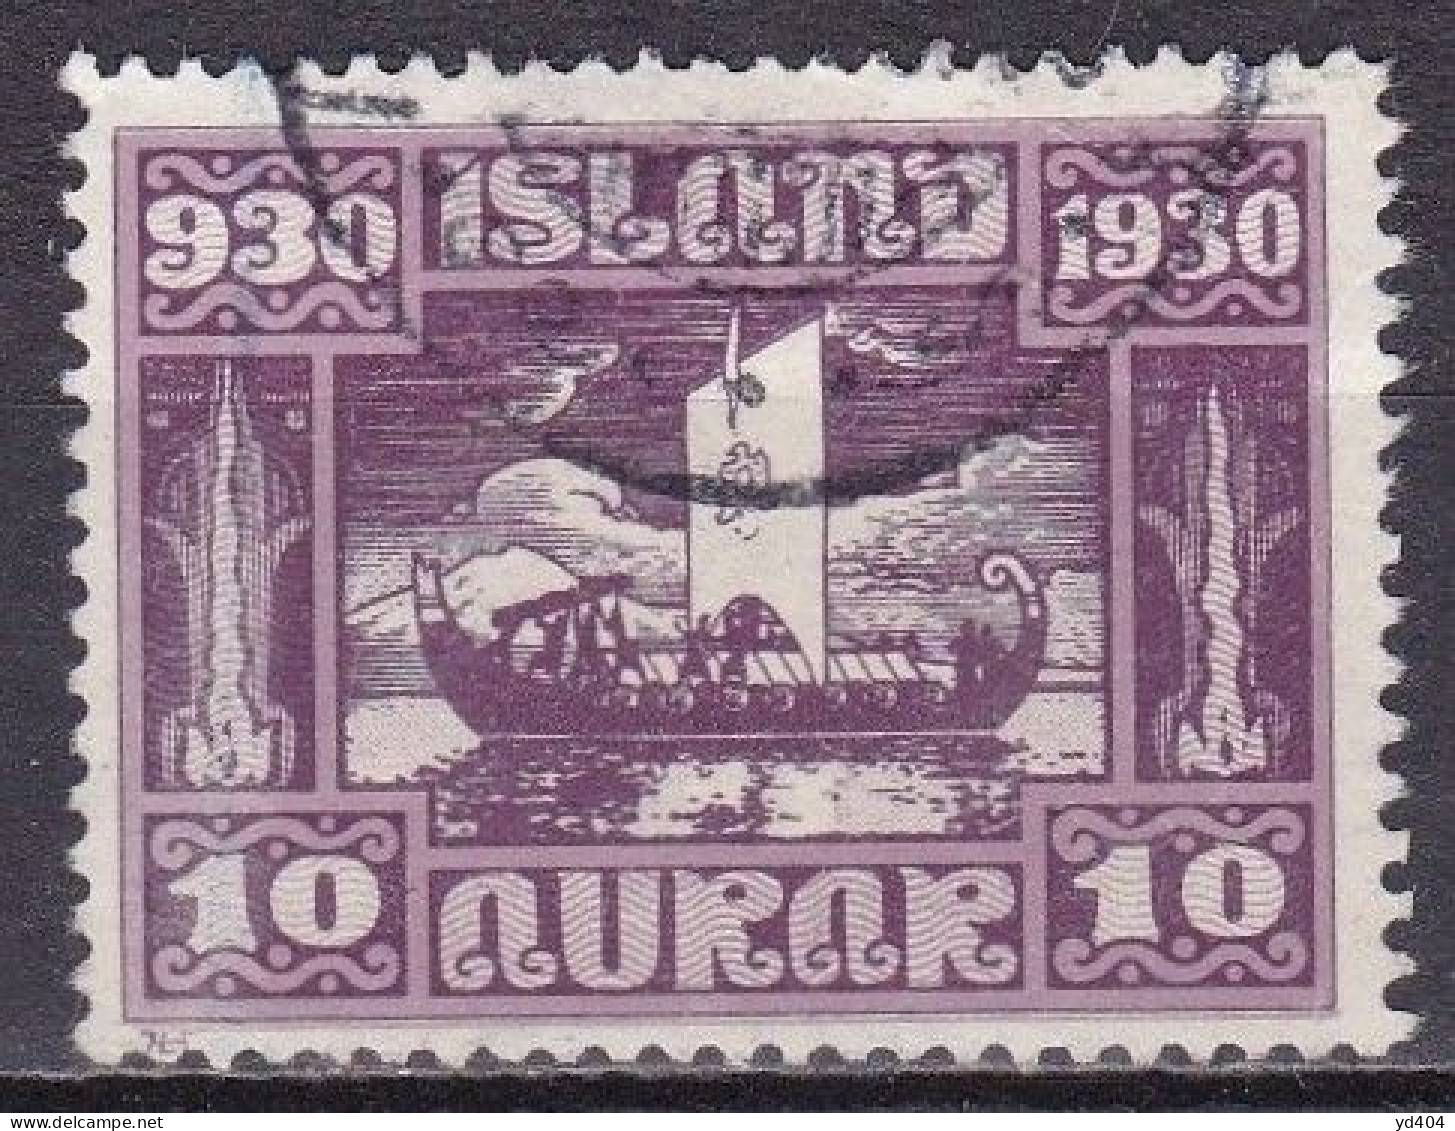 IS020D – ISLANDE – ICELAND – 1930 – MILLENARY OF THE ALTHING – SG # 161 USED 20 € - Used Stamps